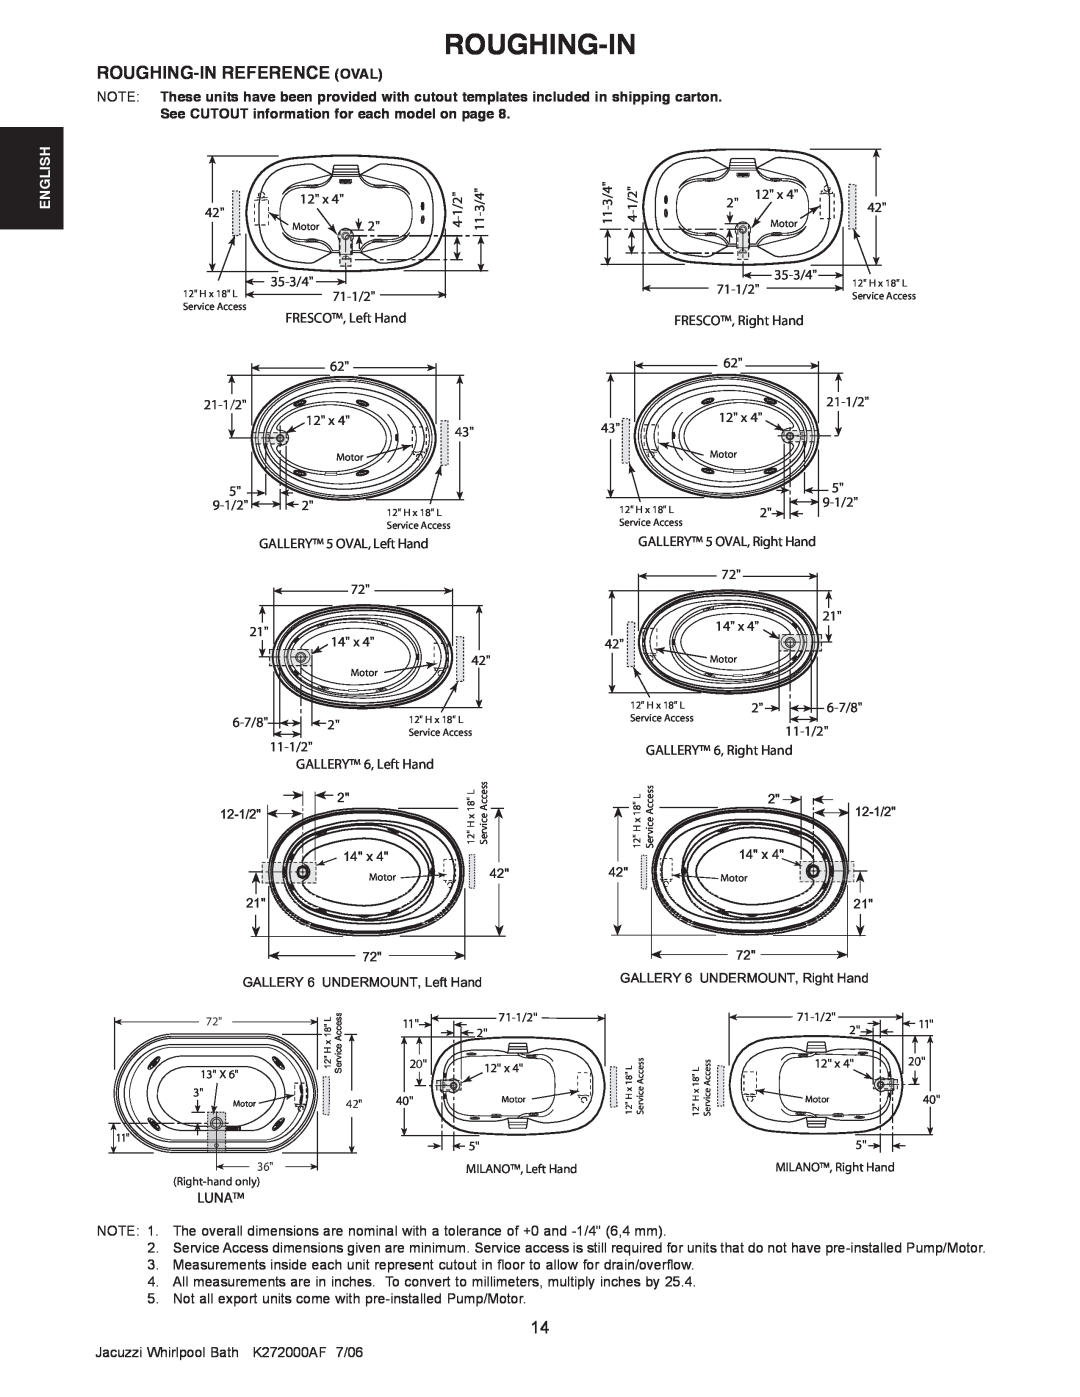 Jacuzzi K272000AF 7/06 manual Roughing-In Reference Oval, See CUTOUT information for each model on page, English 